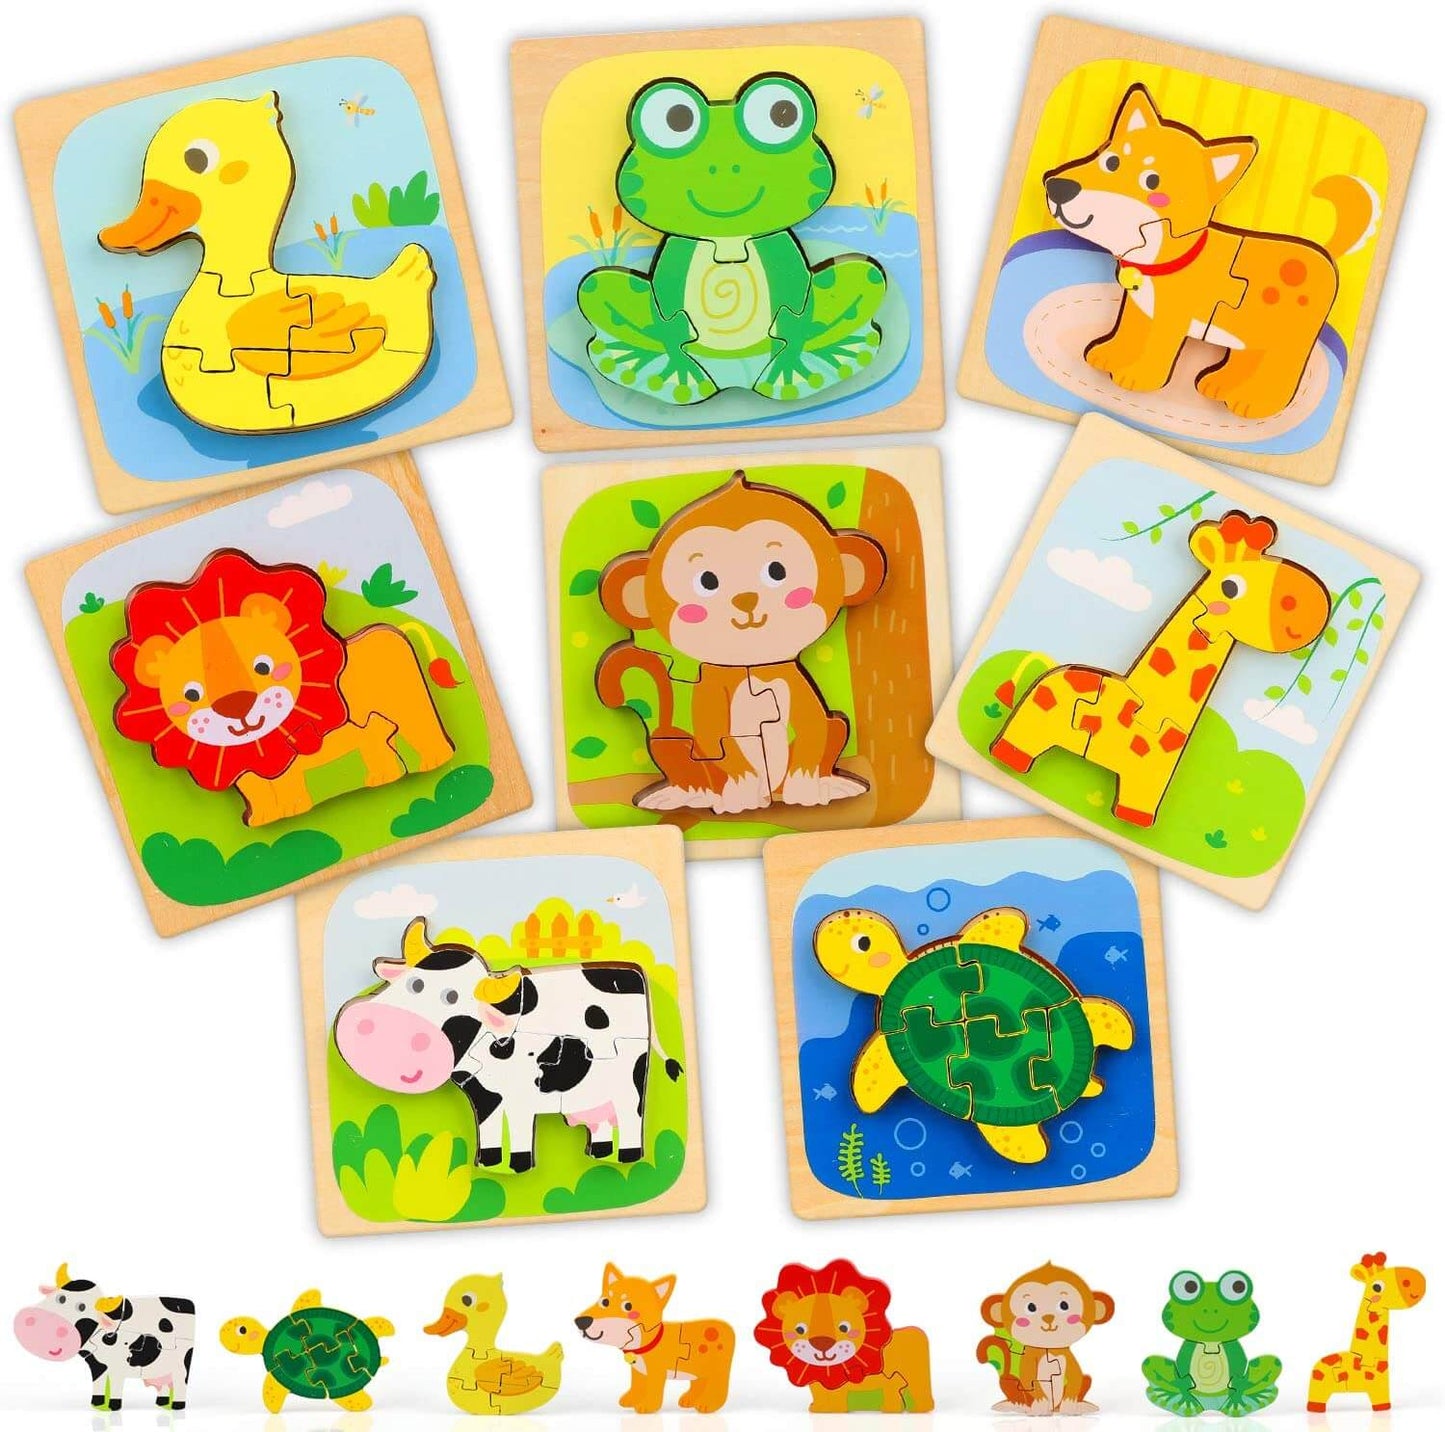 8 Pack Wooden Puzzles